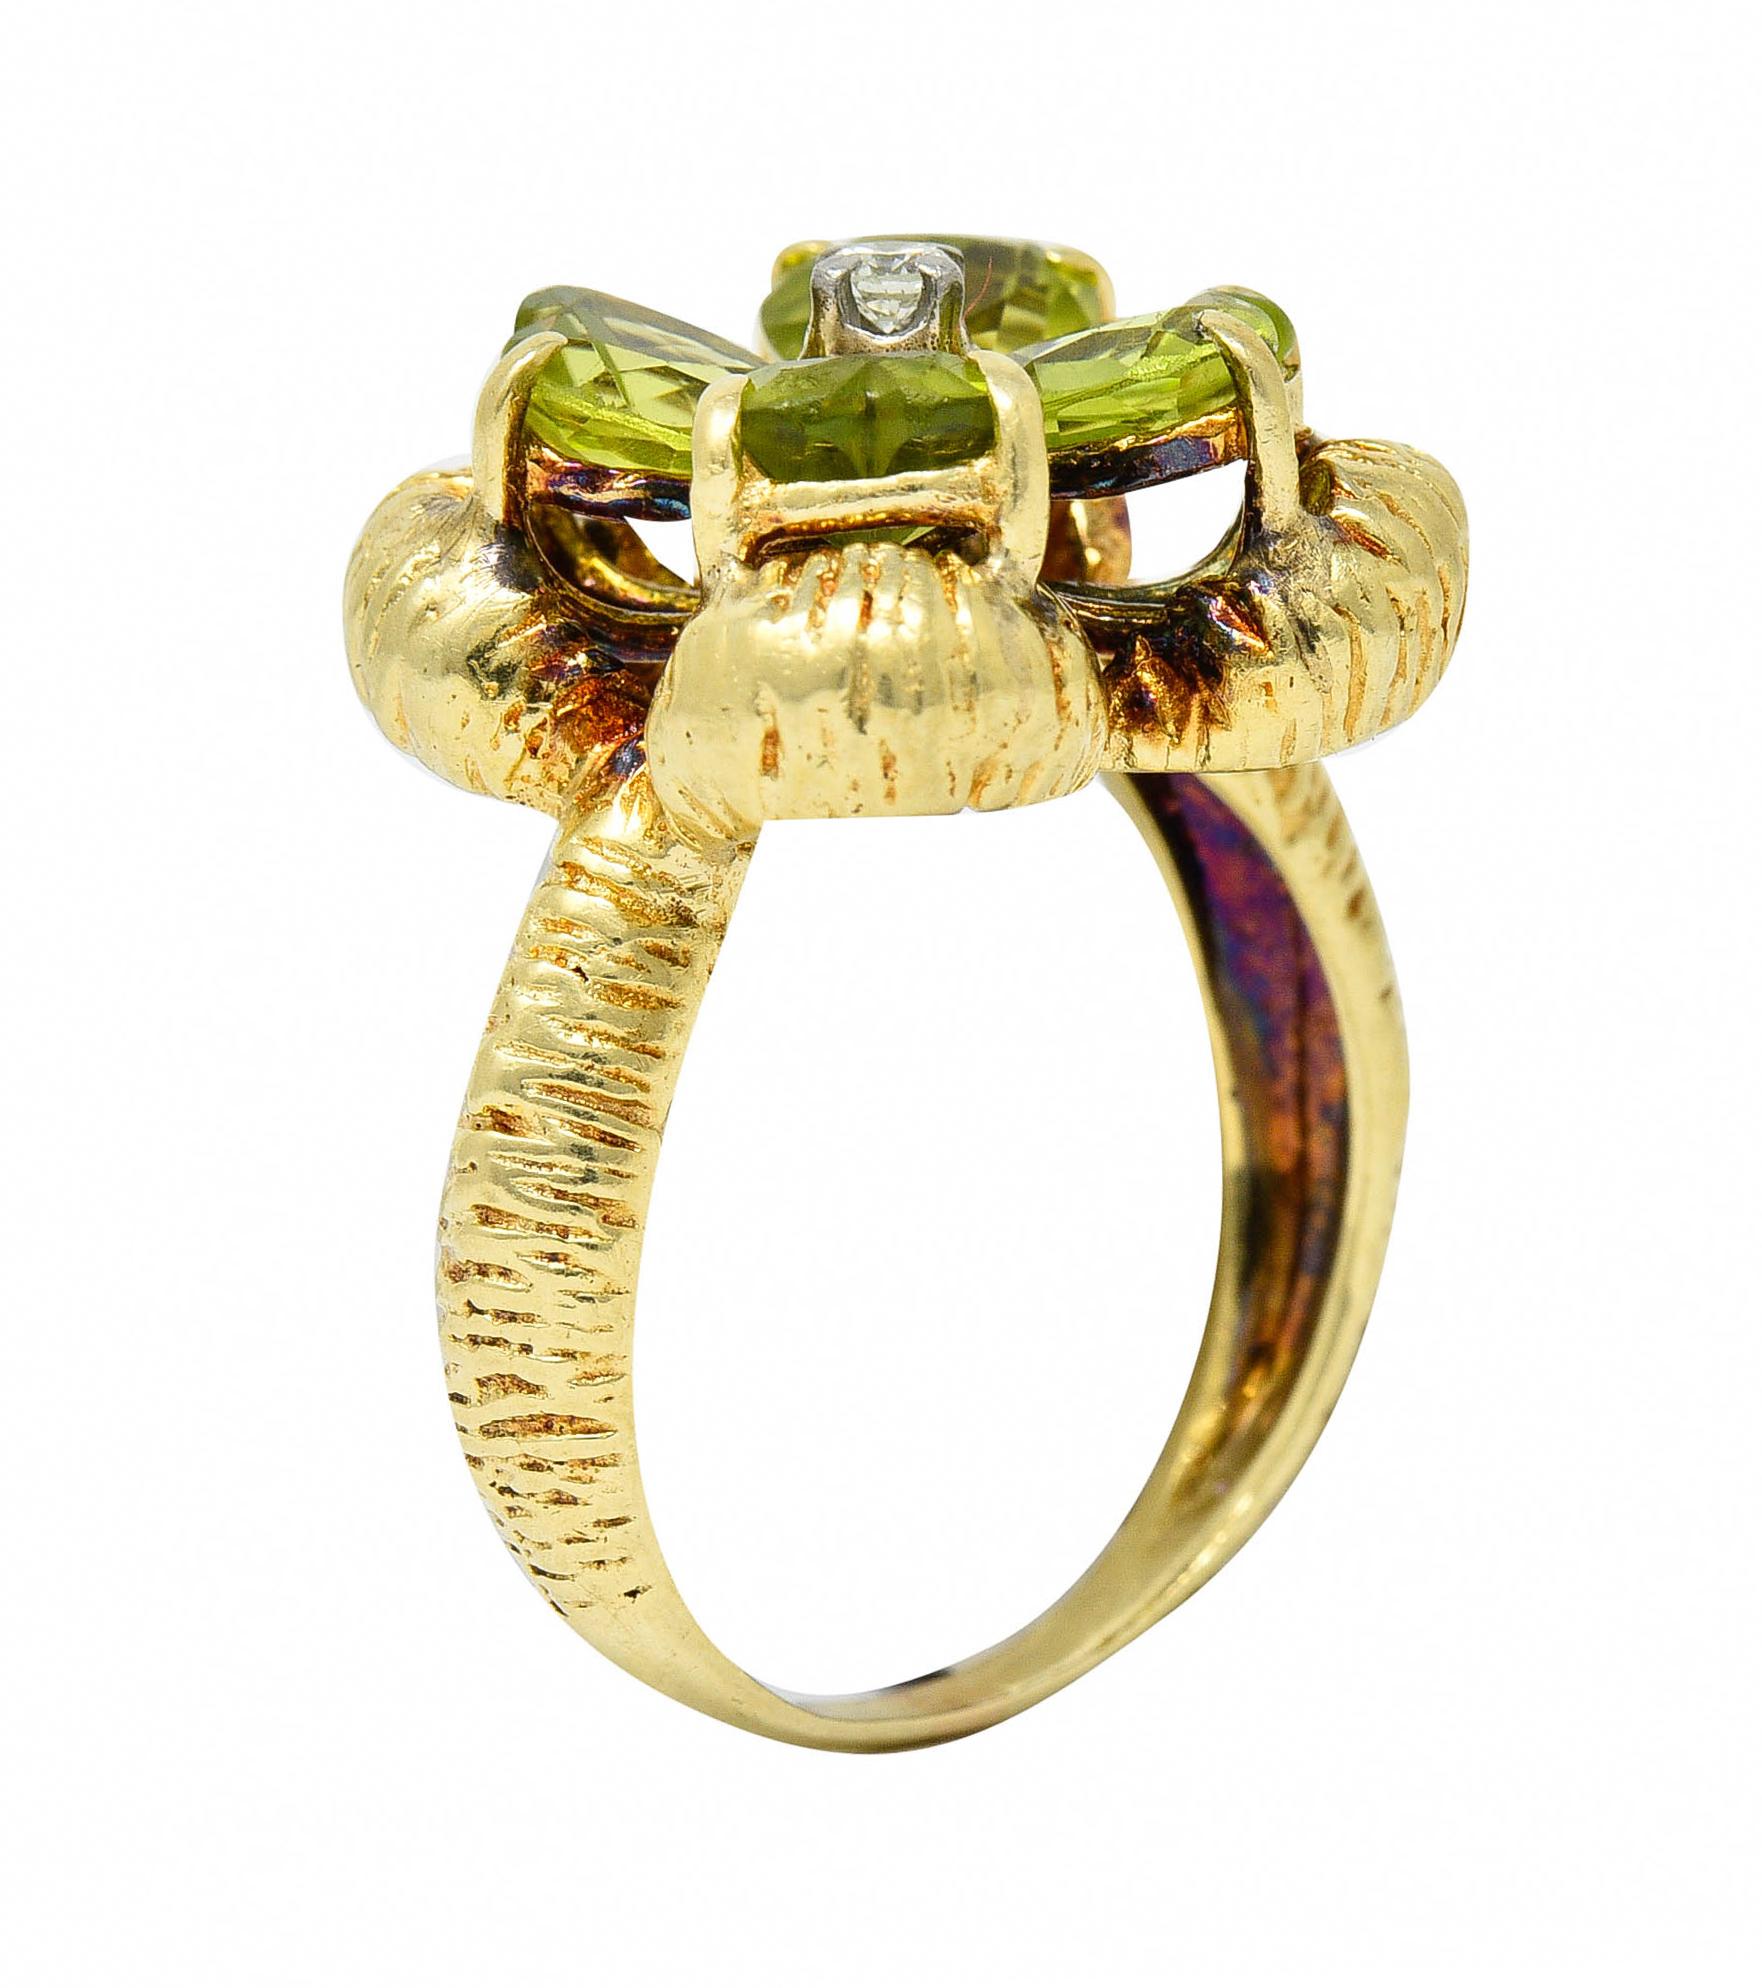 Designed as a stylized clover comprised of heart cut peridot petals

Very well matched and strongly yellowish green while weighing in total approximately 2.80 carats

Centering a round brilliant cut diamond weighing approximately 0.10 carat - eye